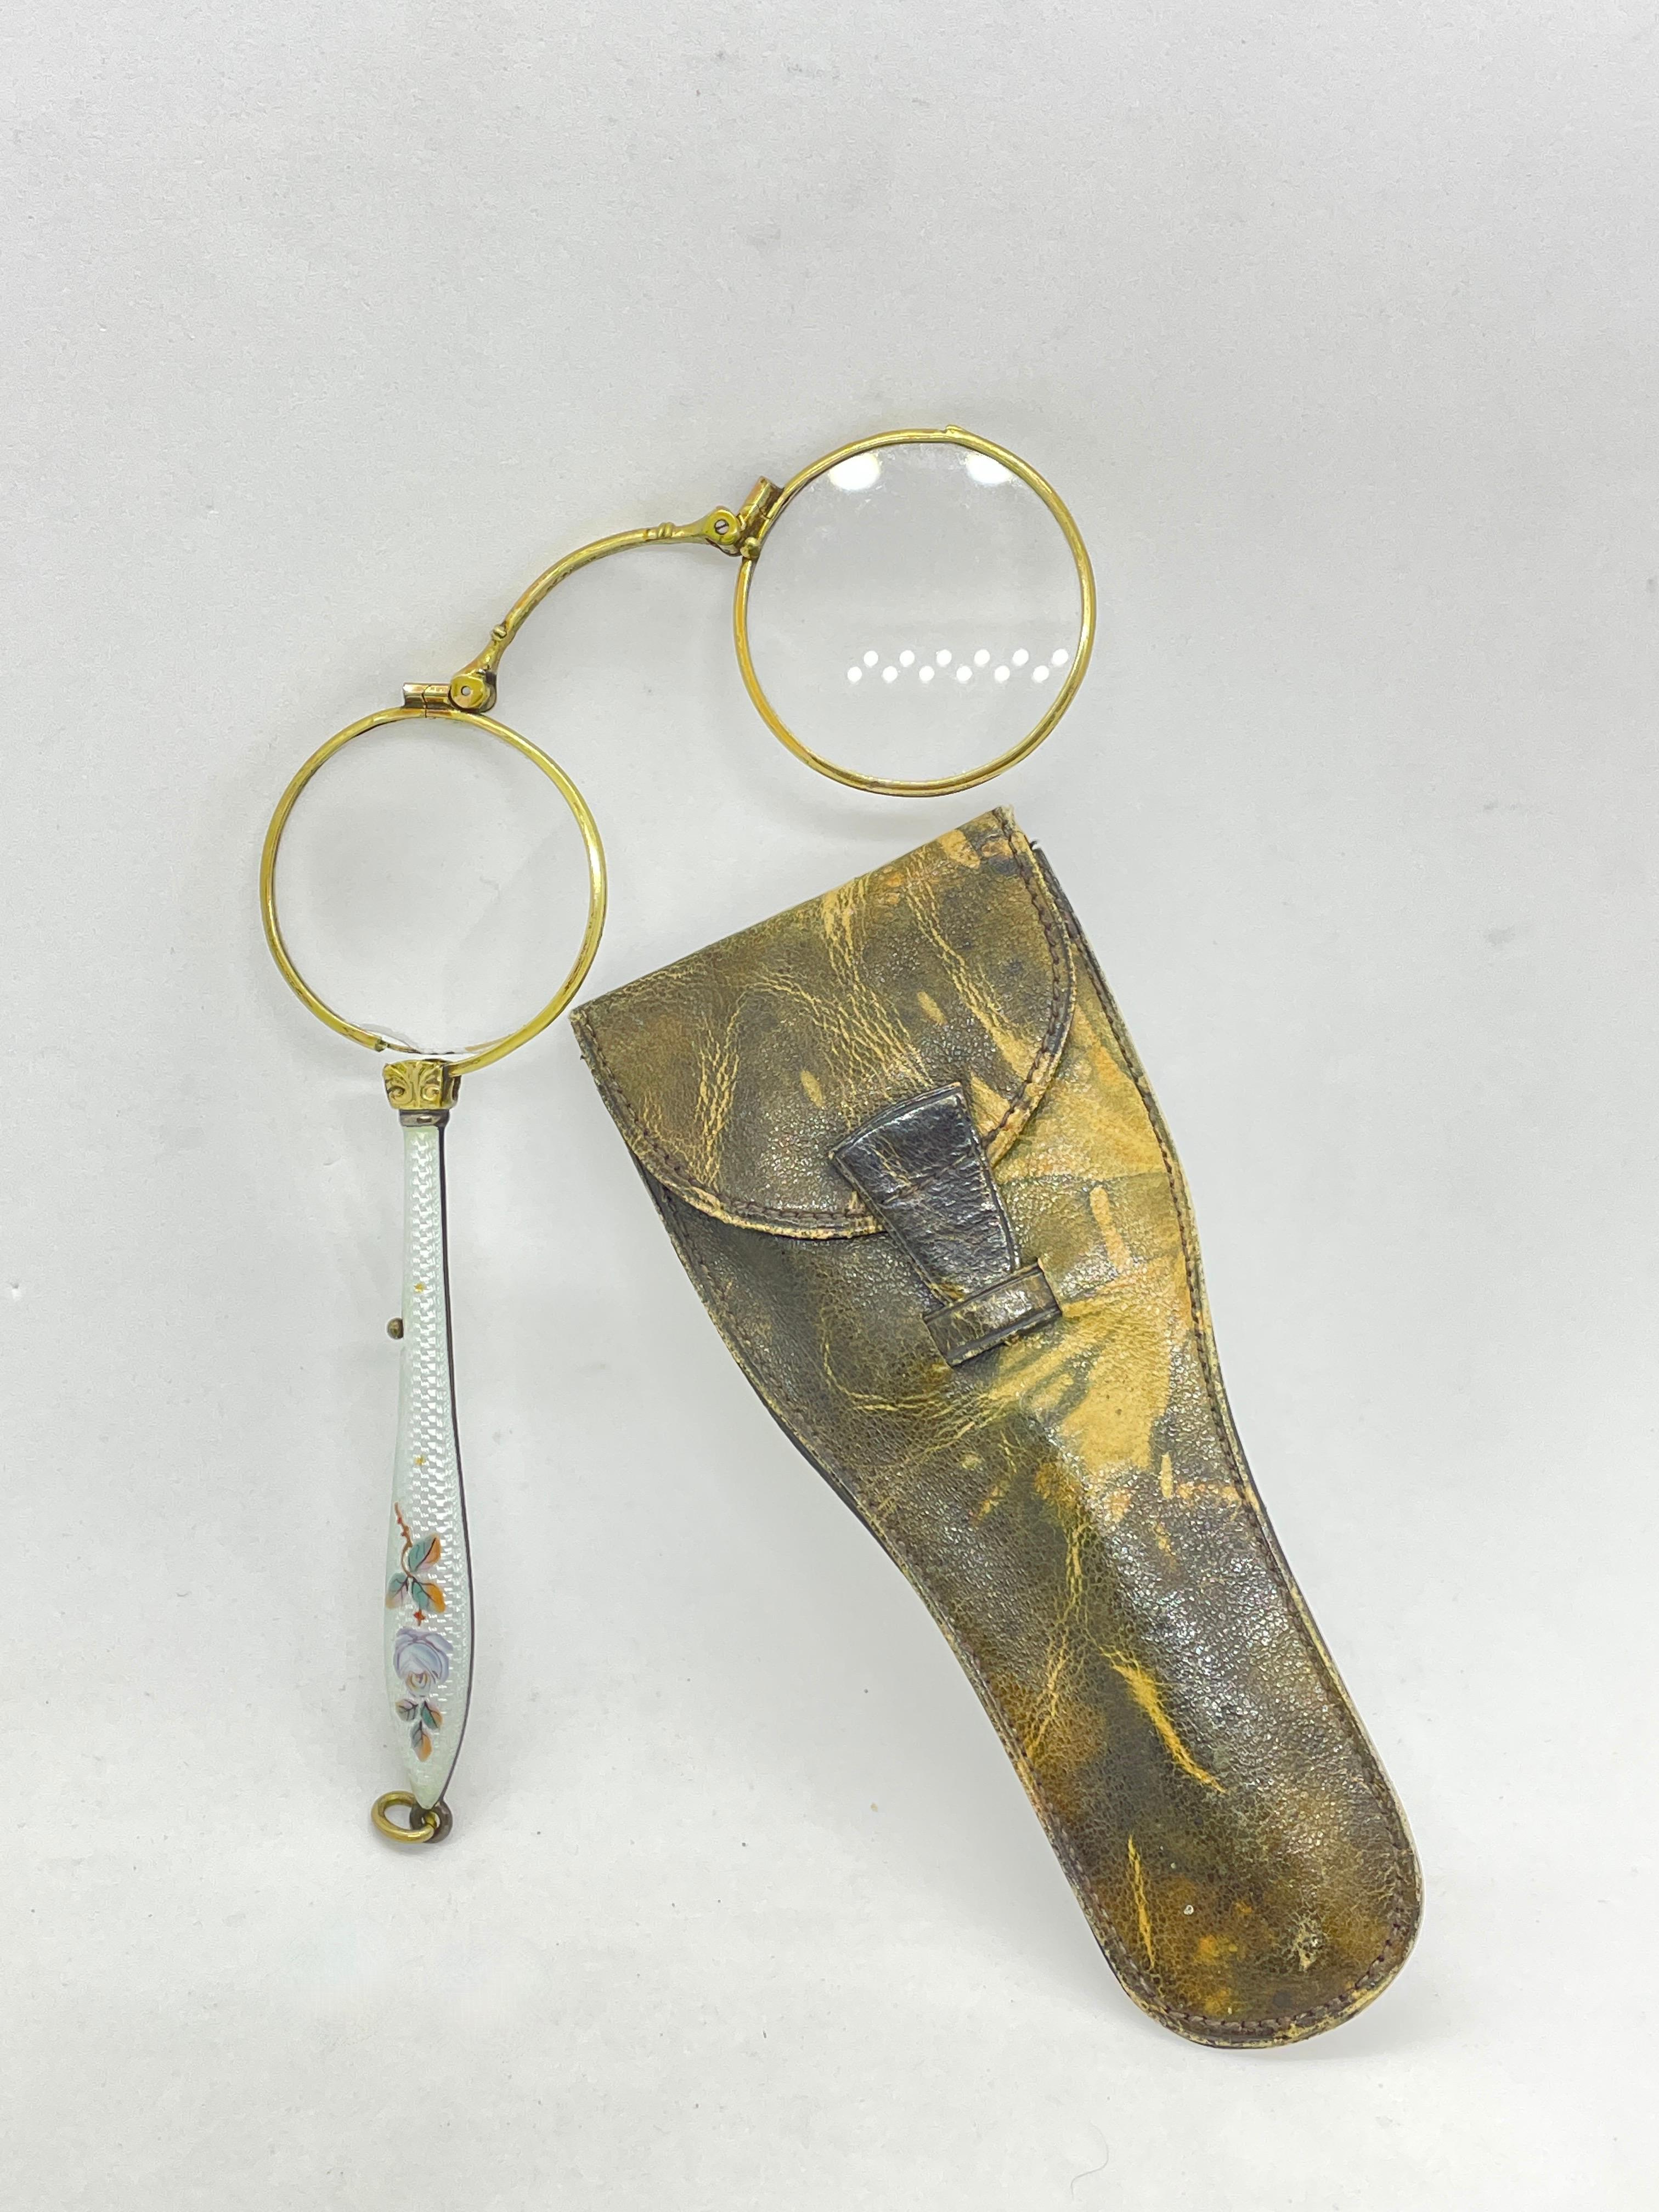 A gorgeous old fashioned 835 silver antique lorgnette with a enamel design on the handle. This pair of eyeglasses or opera glasses feature a 